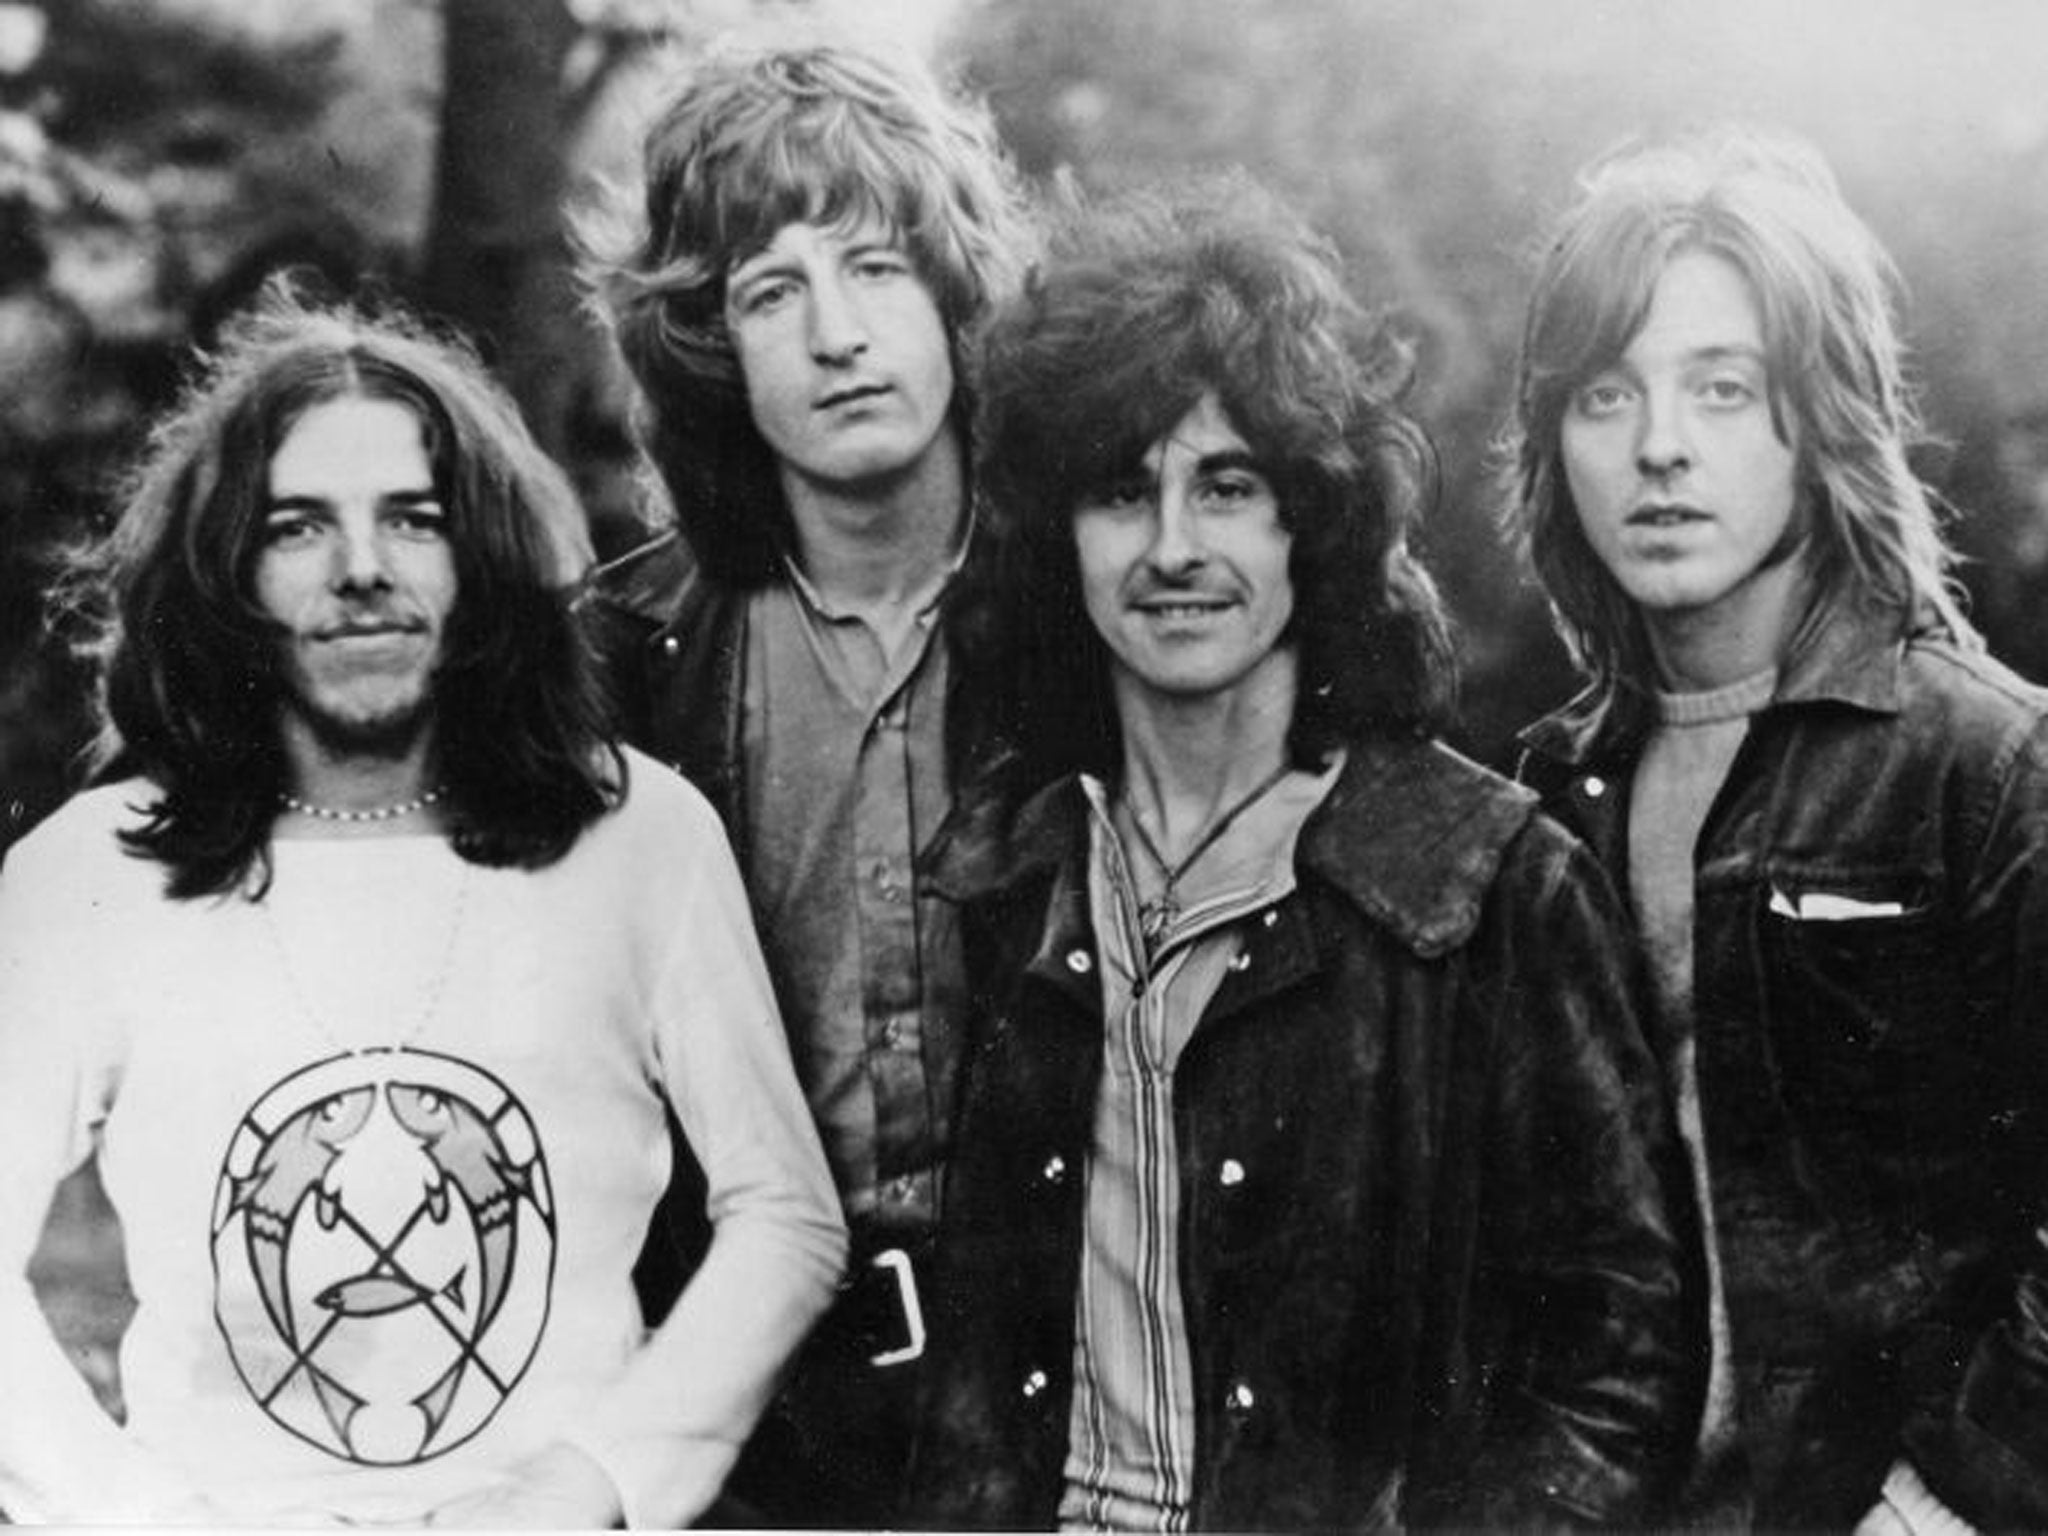 Badfinger in 1971: from left, Mike Gibbins, Pete Ham, Tom Evans and Joey Molland